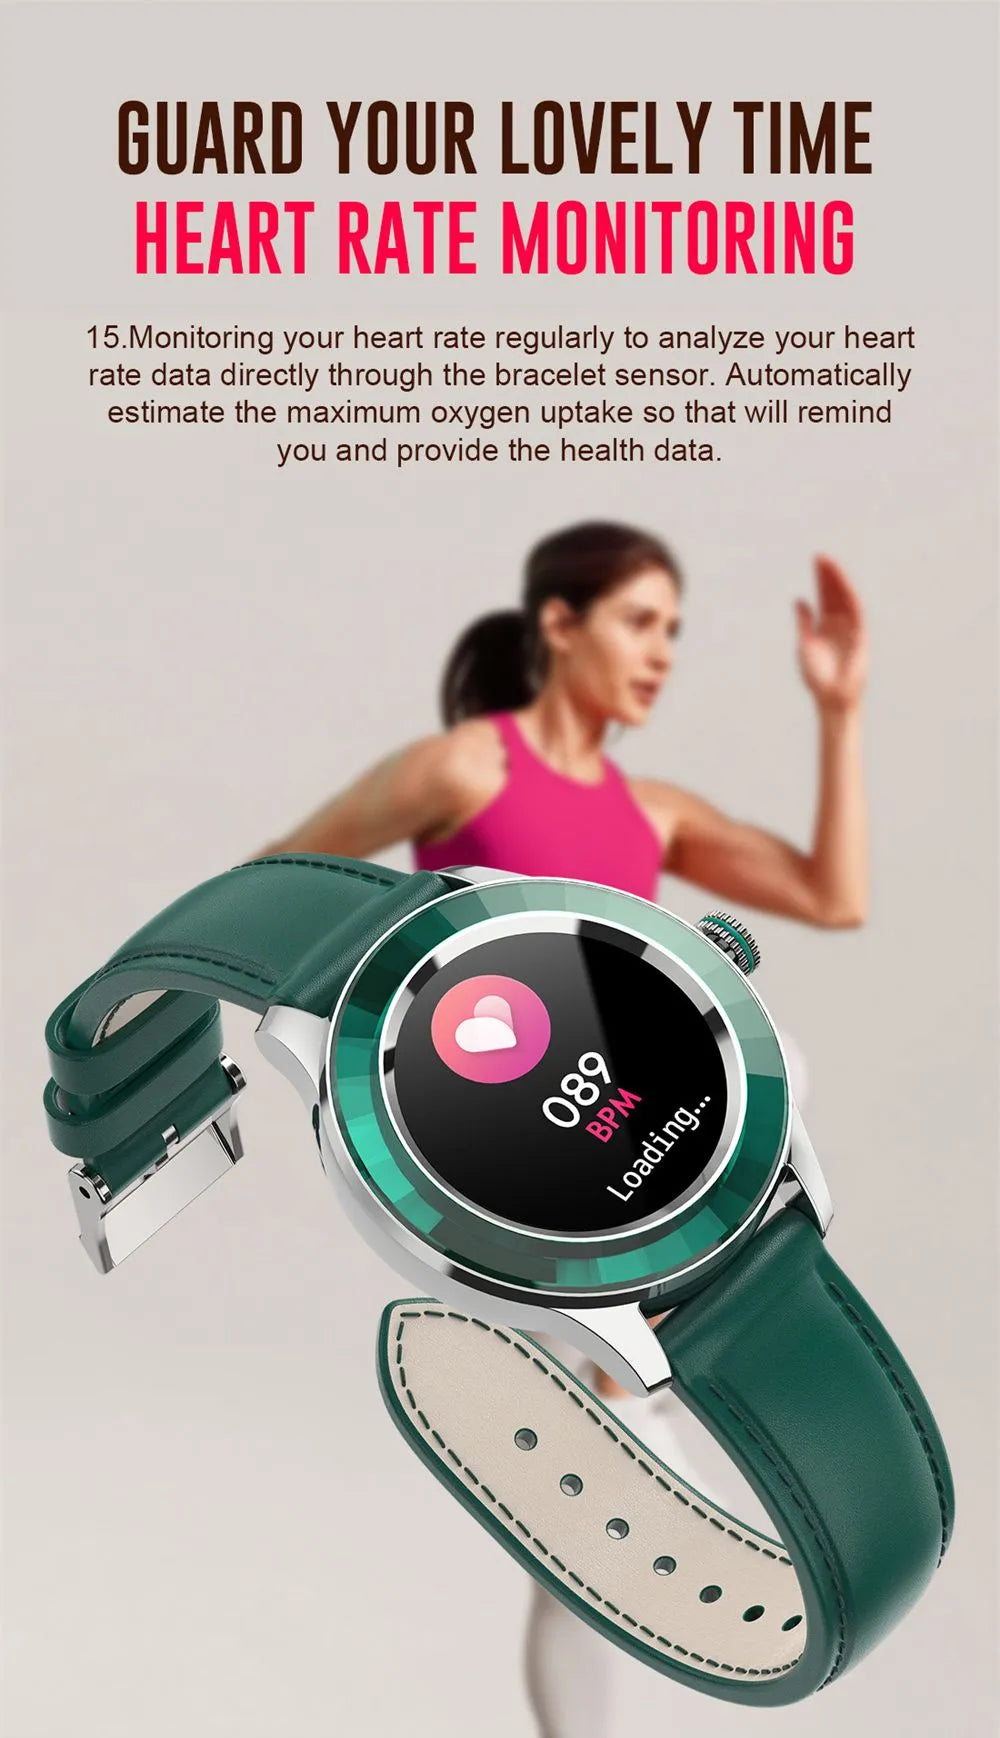 Touch Screen Smart Watch | Smart Watches for Sale | ElectoWatch